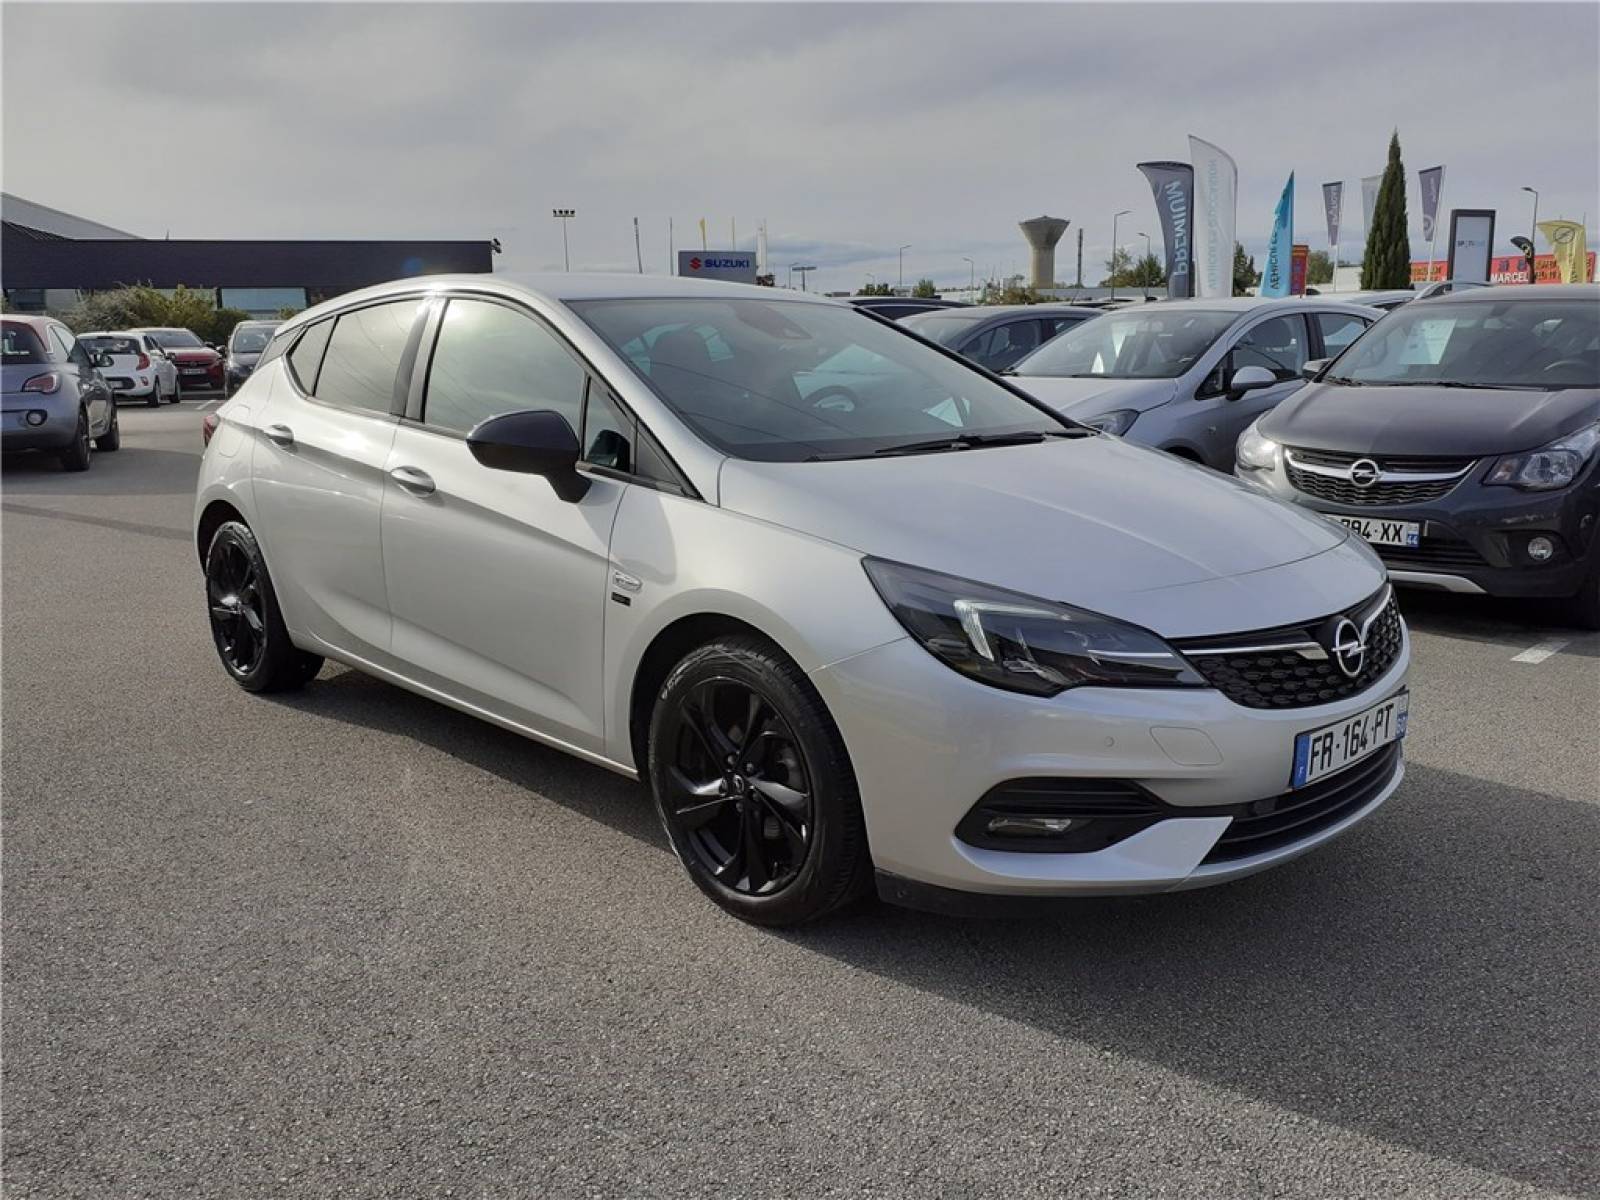 OPEL Astra 1.2 Turbo 130 ch BVM6 - véhicule d'occasion - Groupe Guillet - Opel Magicauto - Chalon-sur-Saône - 71380 - Saint-Marcel - 4